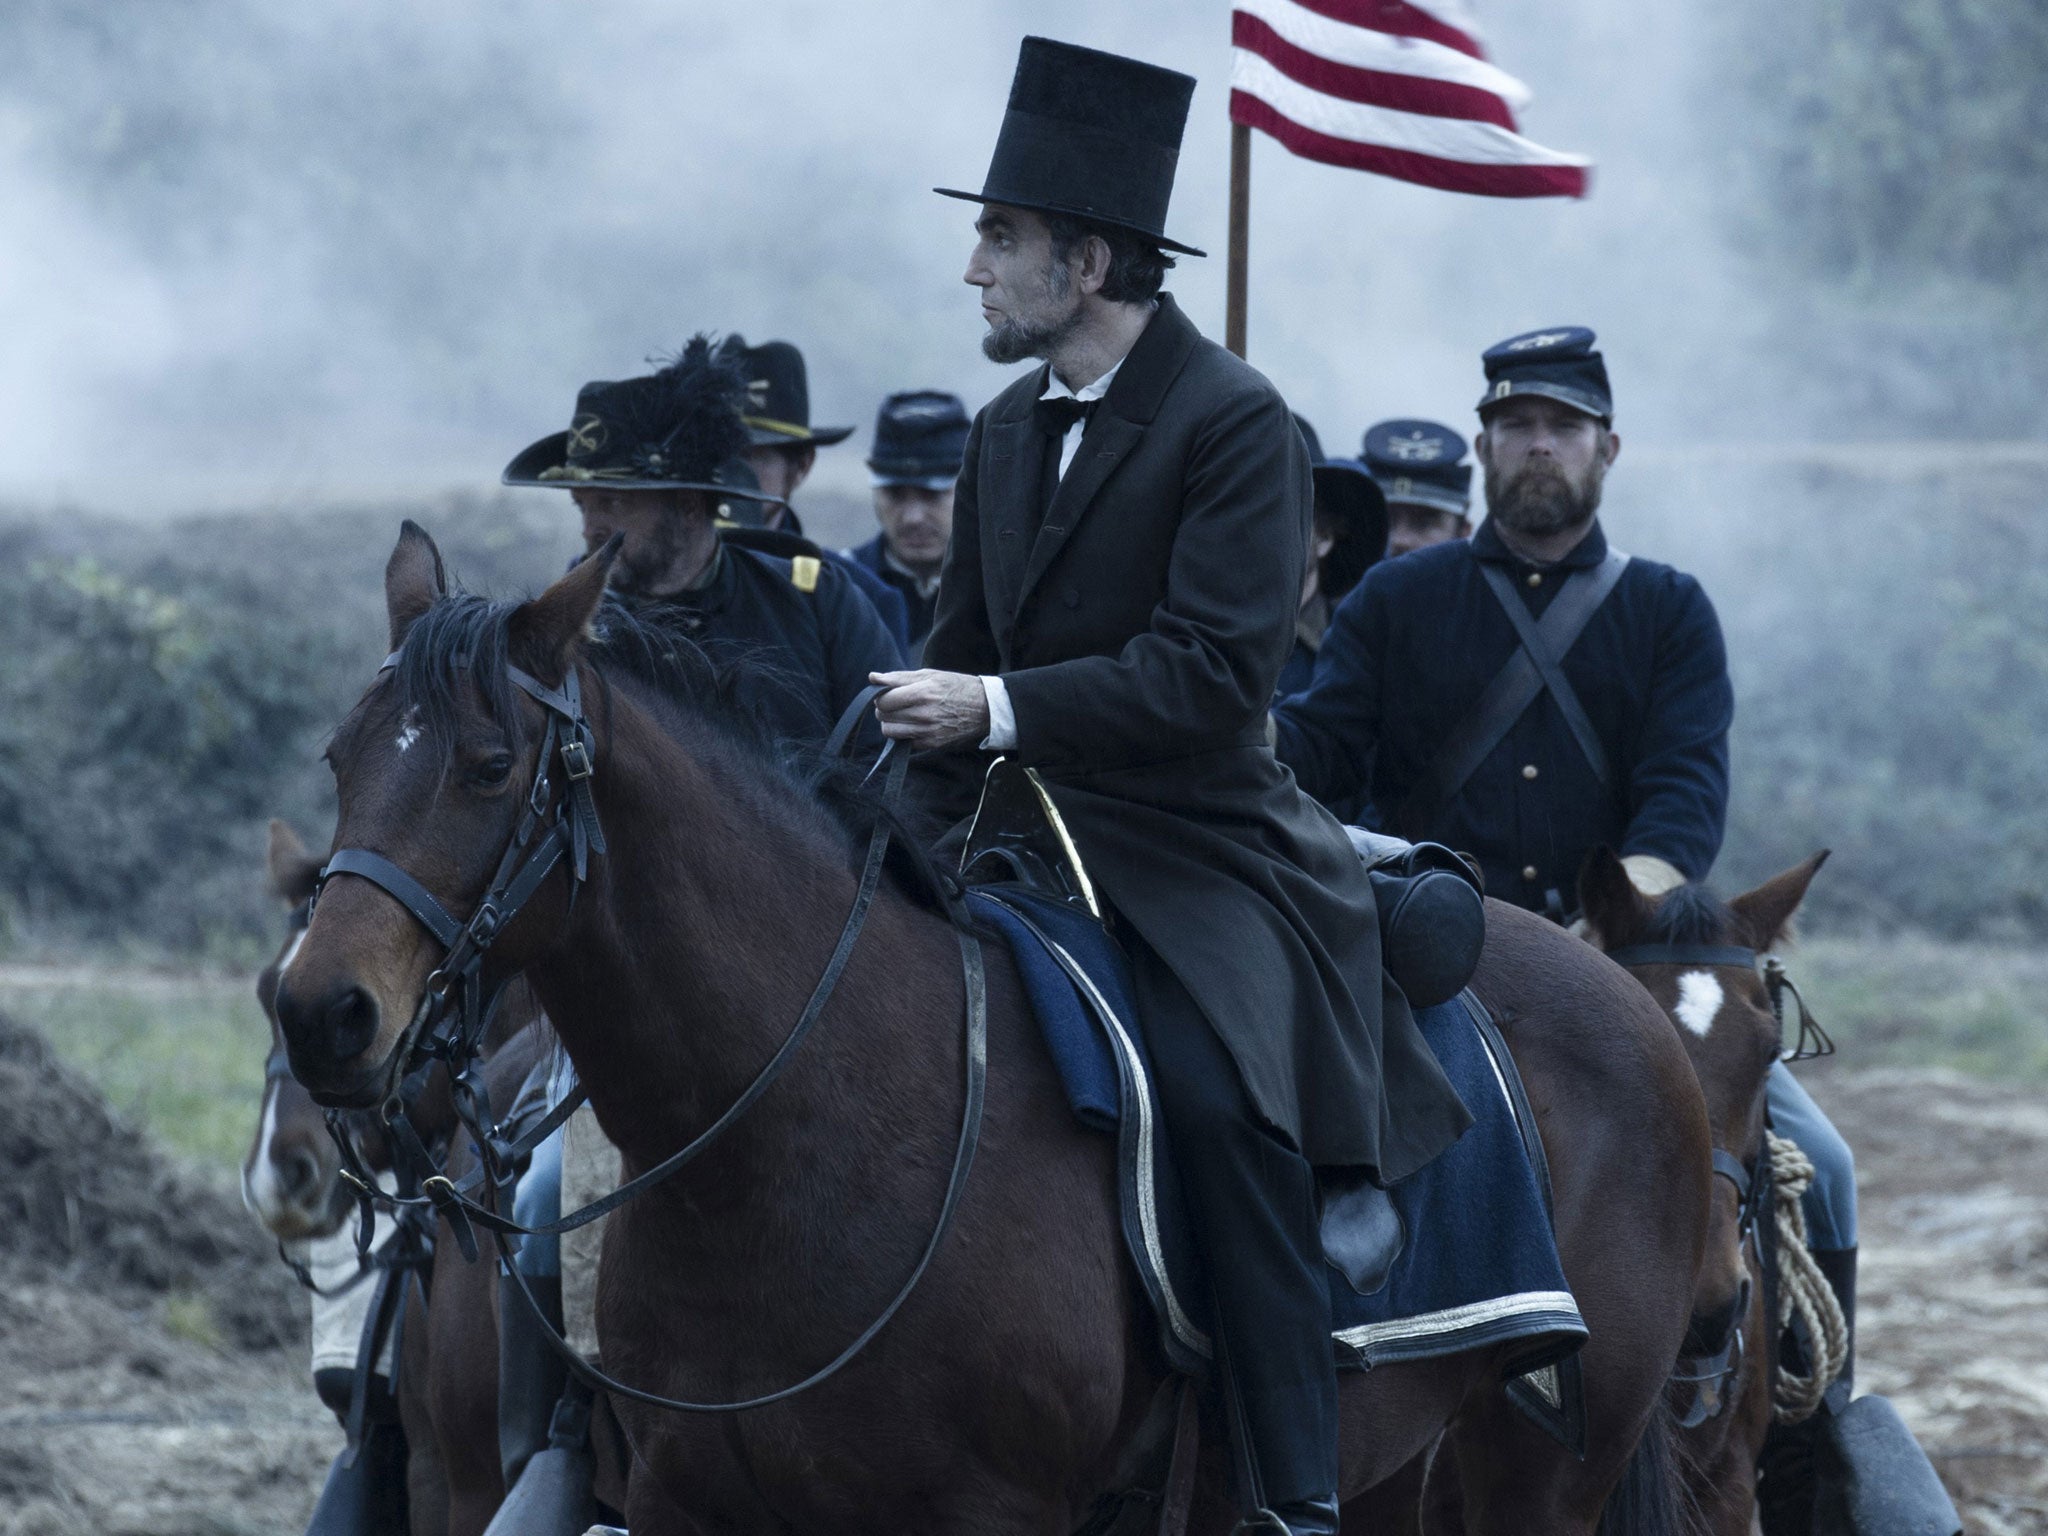 Political wiles: Daniel Day-Lewis as Lincoln, who could handle the opposition